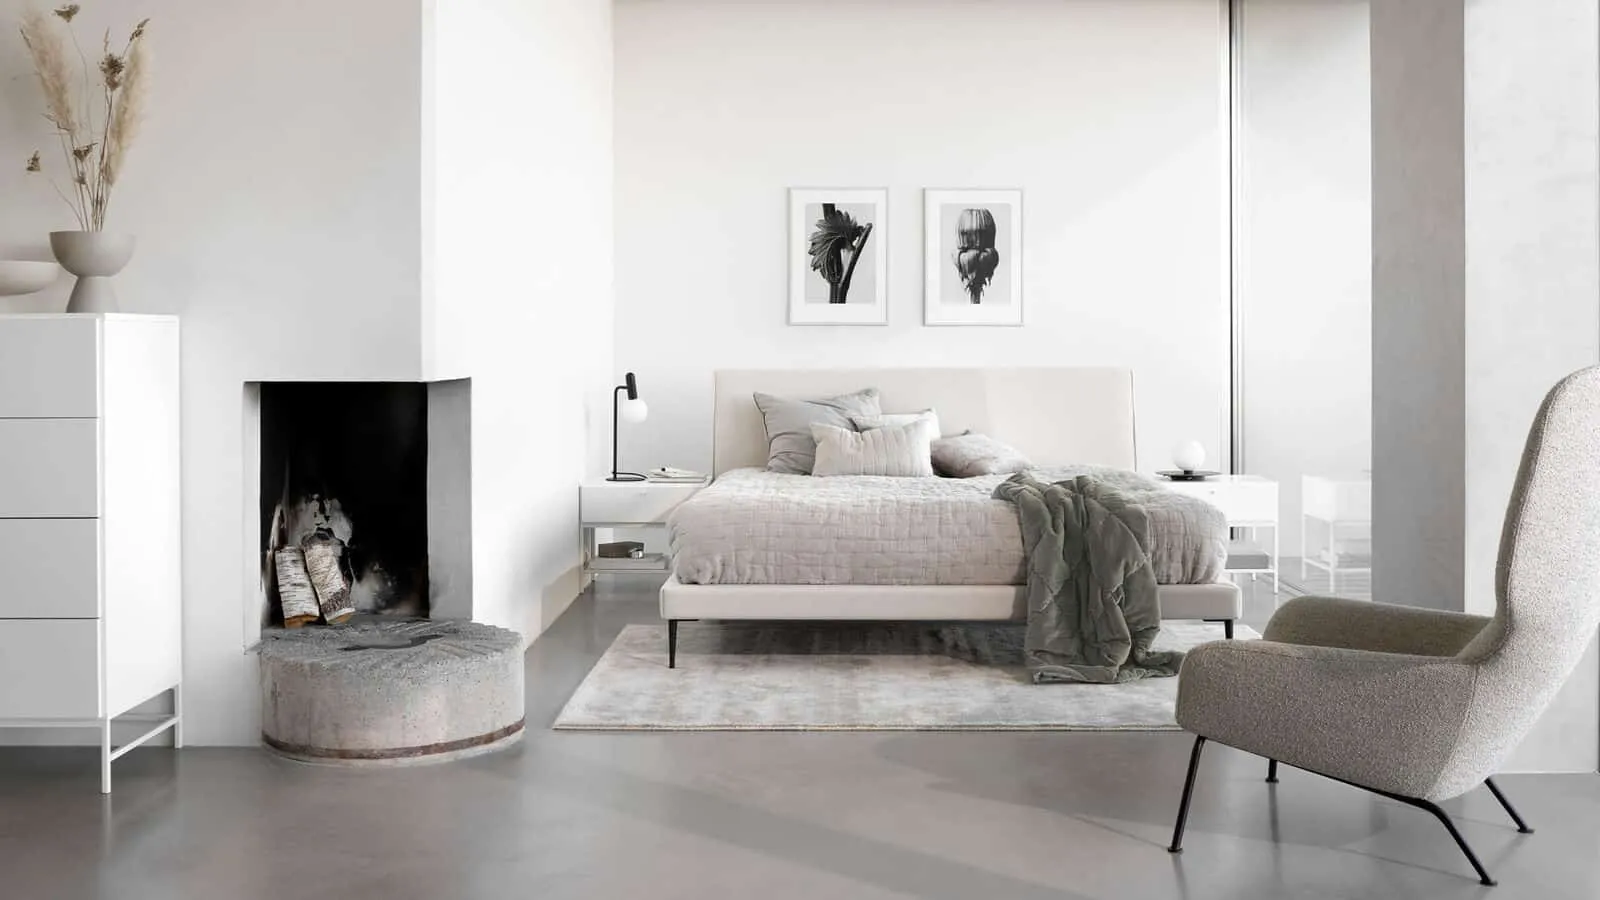 bedroom with white walls, white pillows and mattress, beautiful double bed design, chair, grey floor, wall hangings